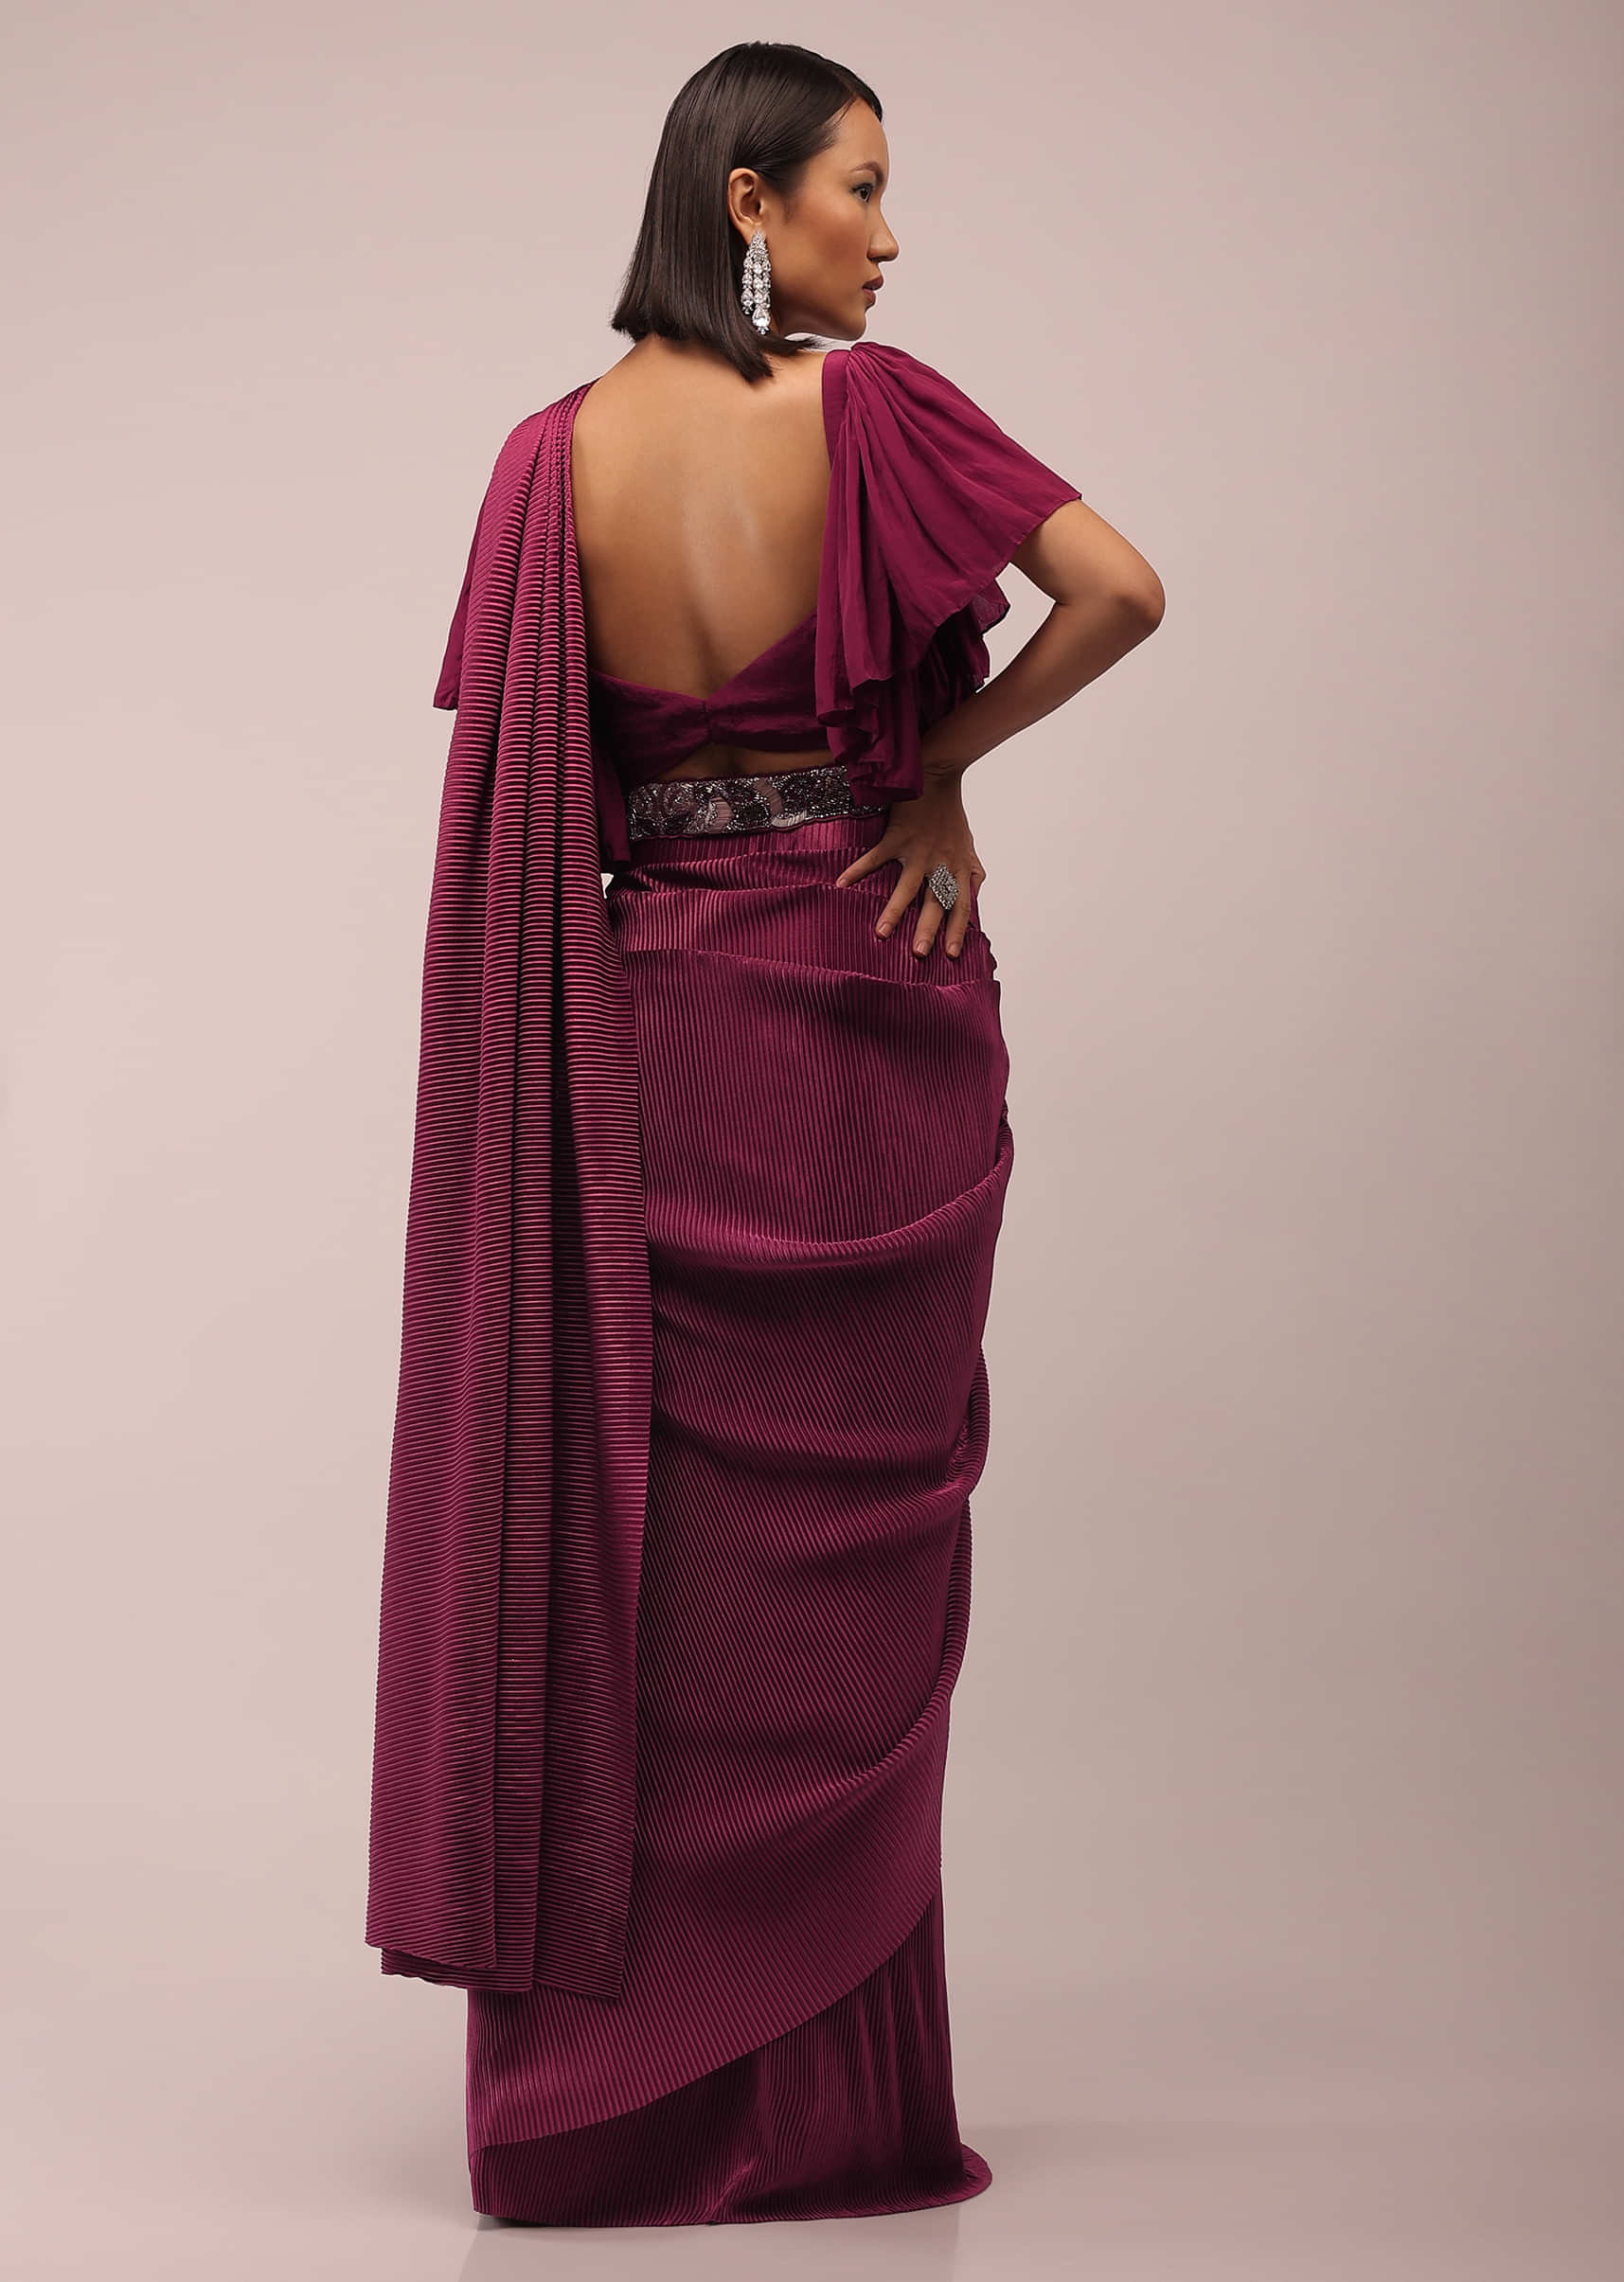 Wine Ready Pleated Saree In Crush With A Bell Sleeve Blouse And Embroidered Belt